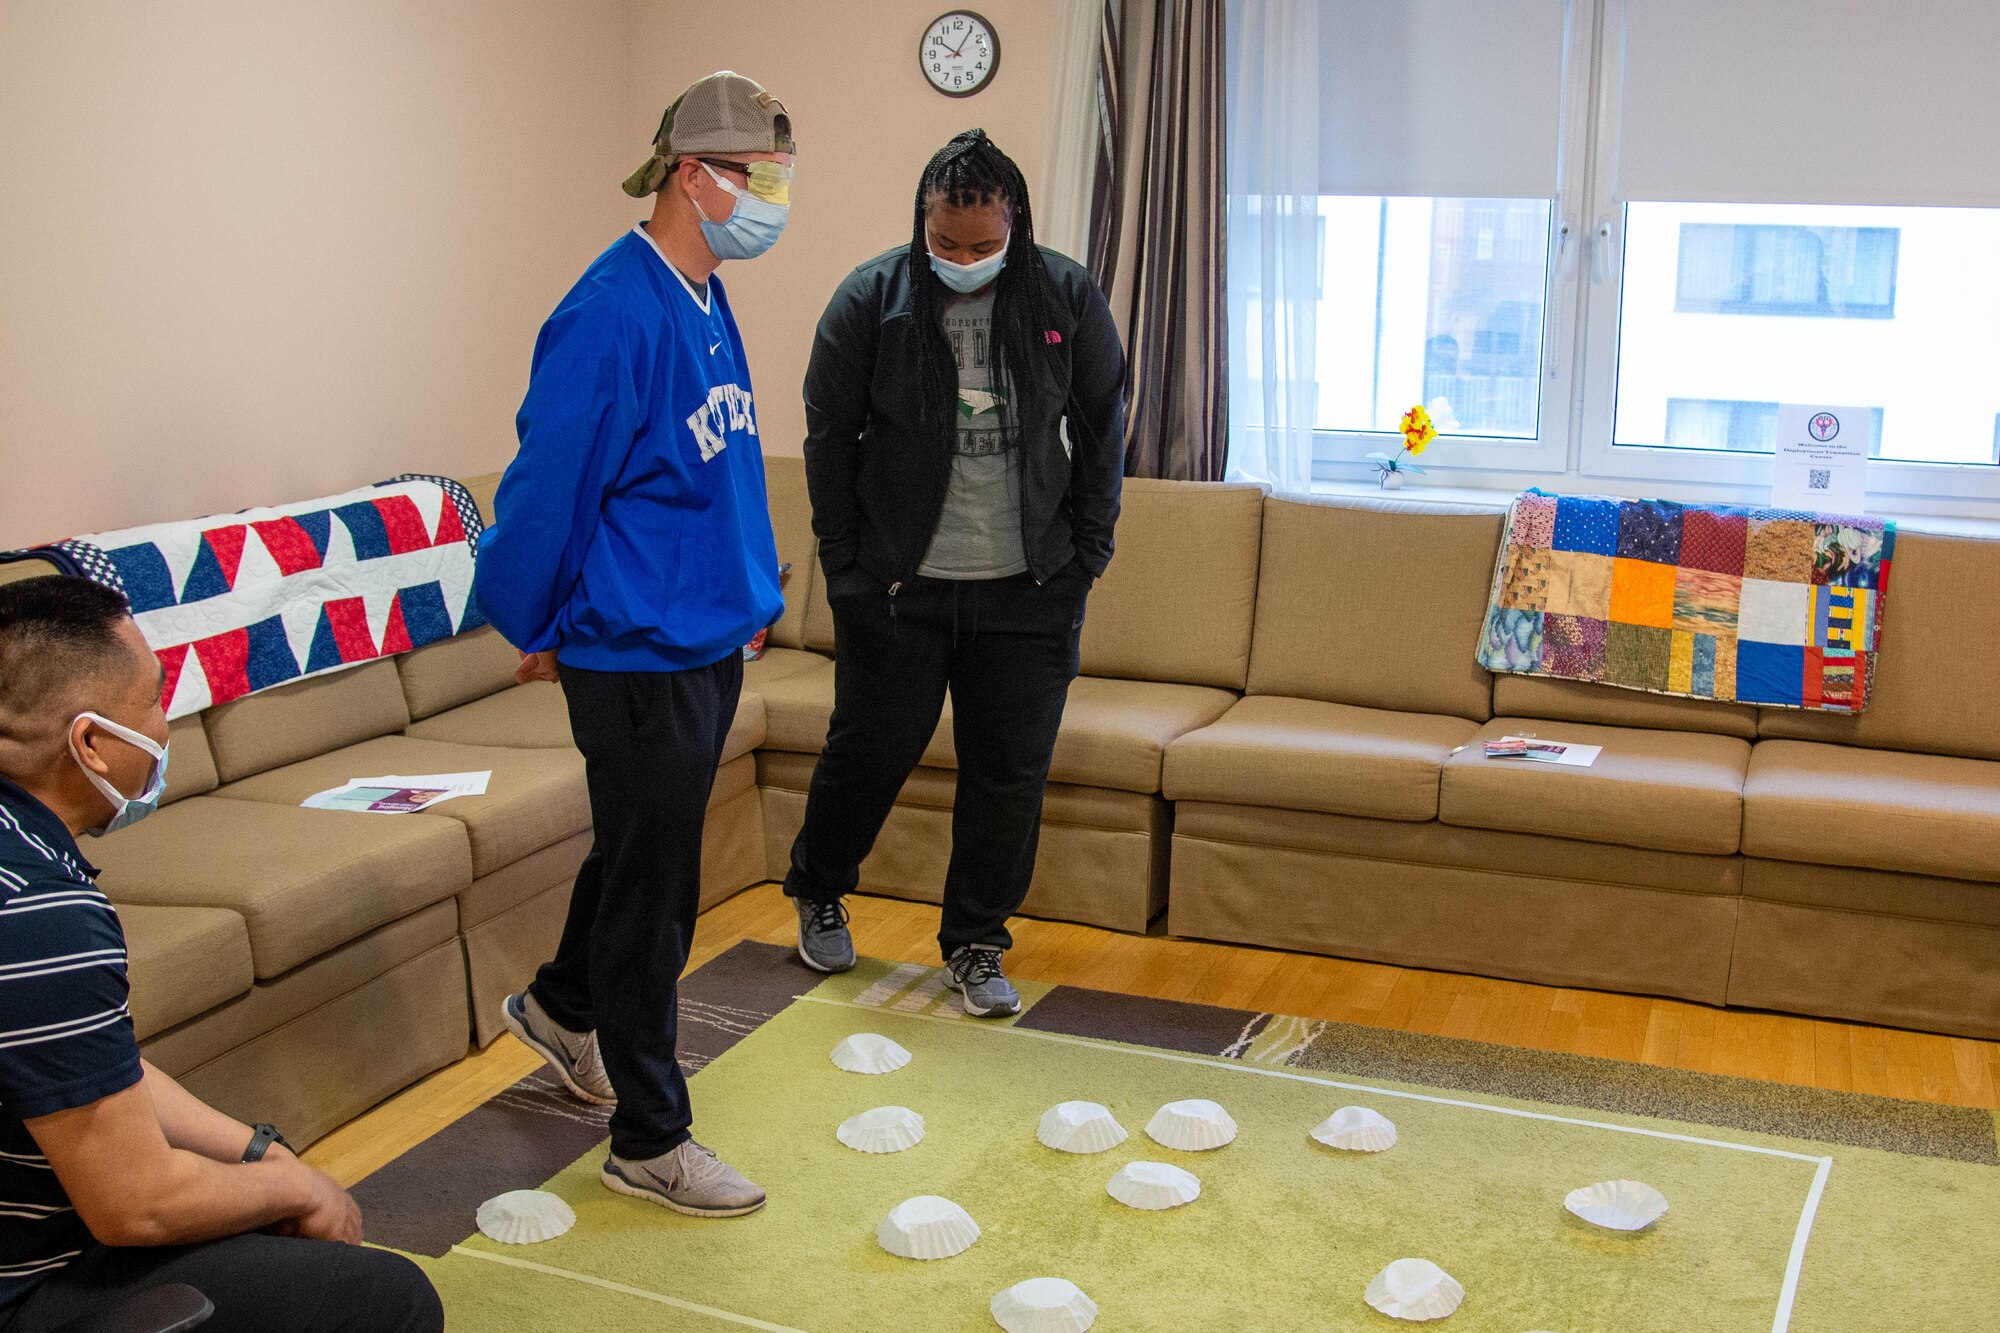 A woman guides a blindfolded man across a carpet with coffee filters on it.